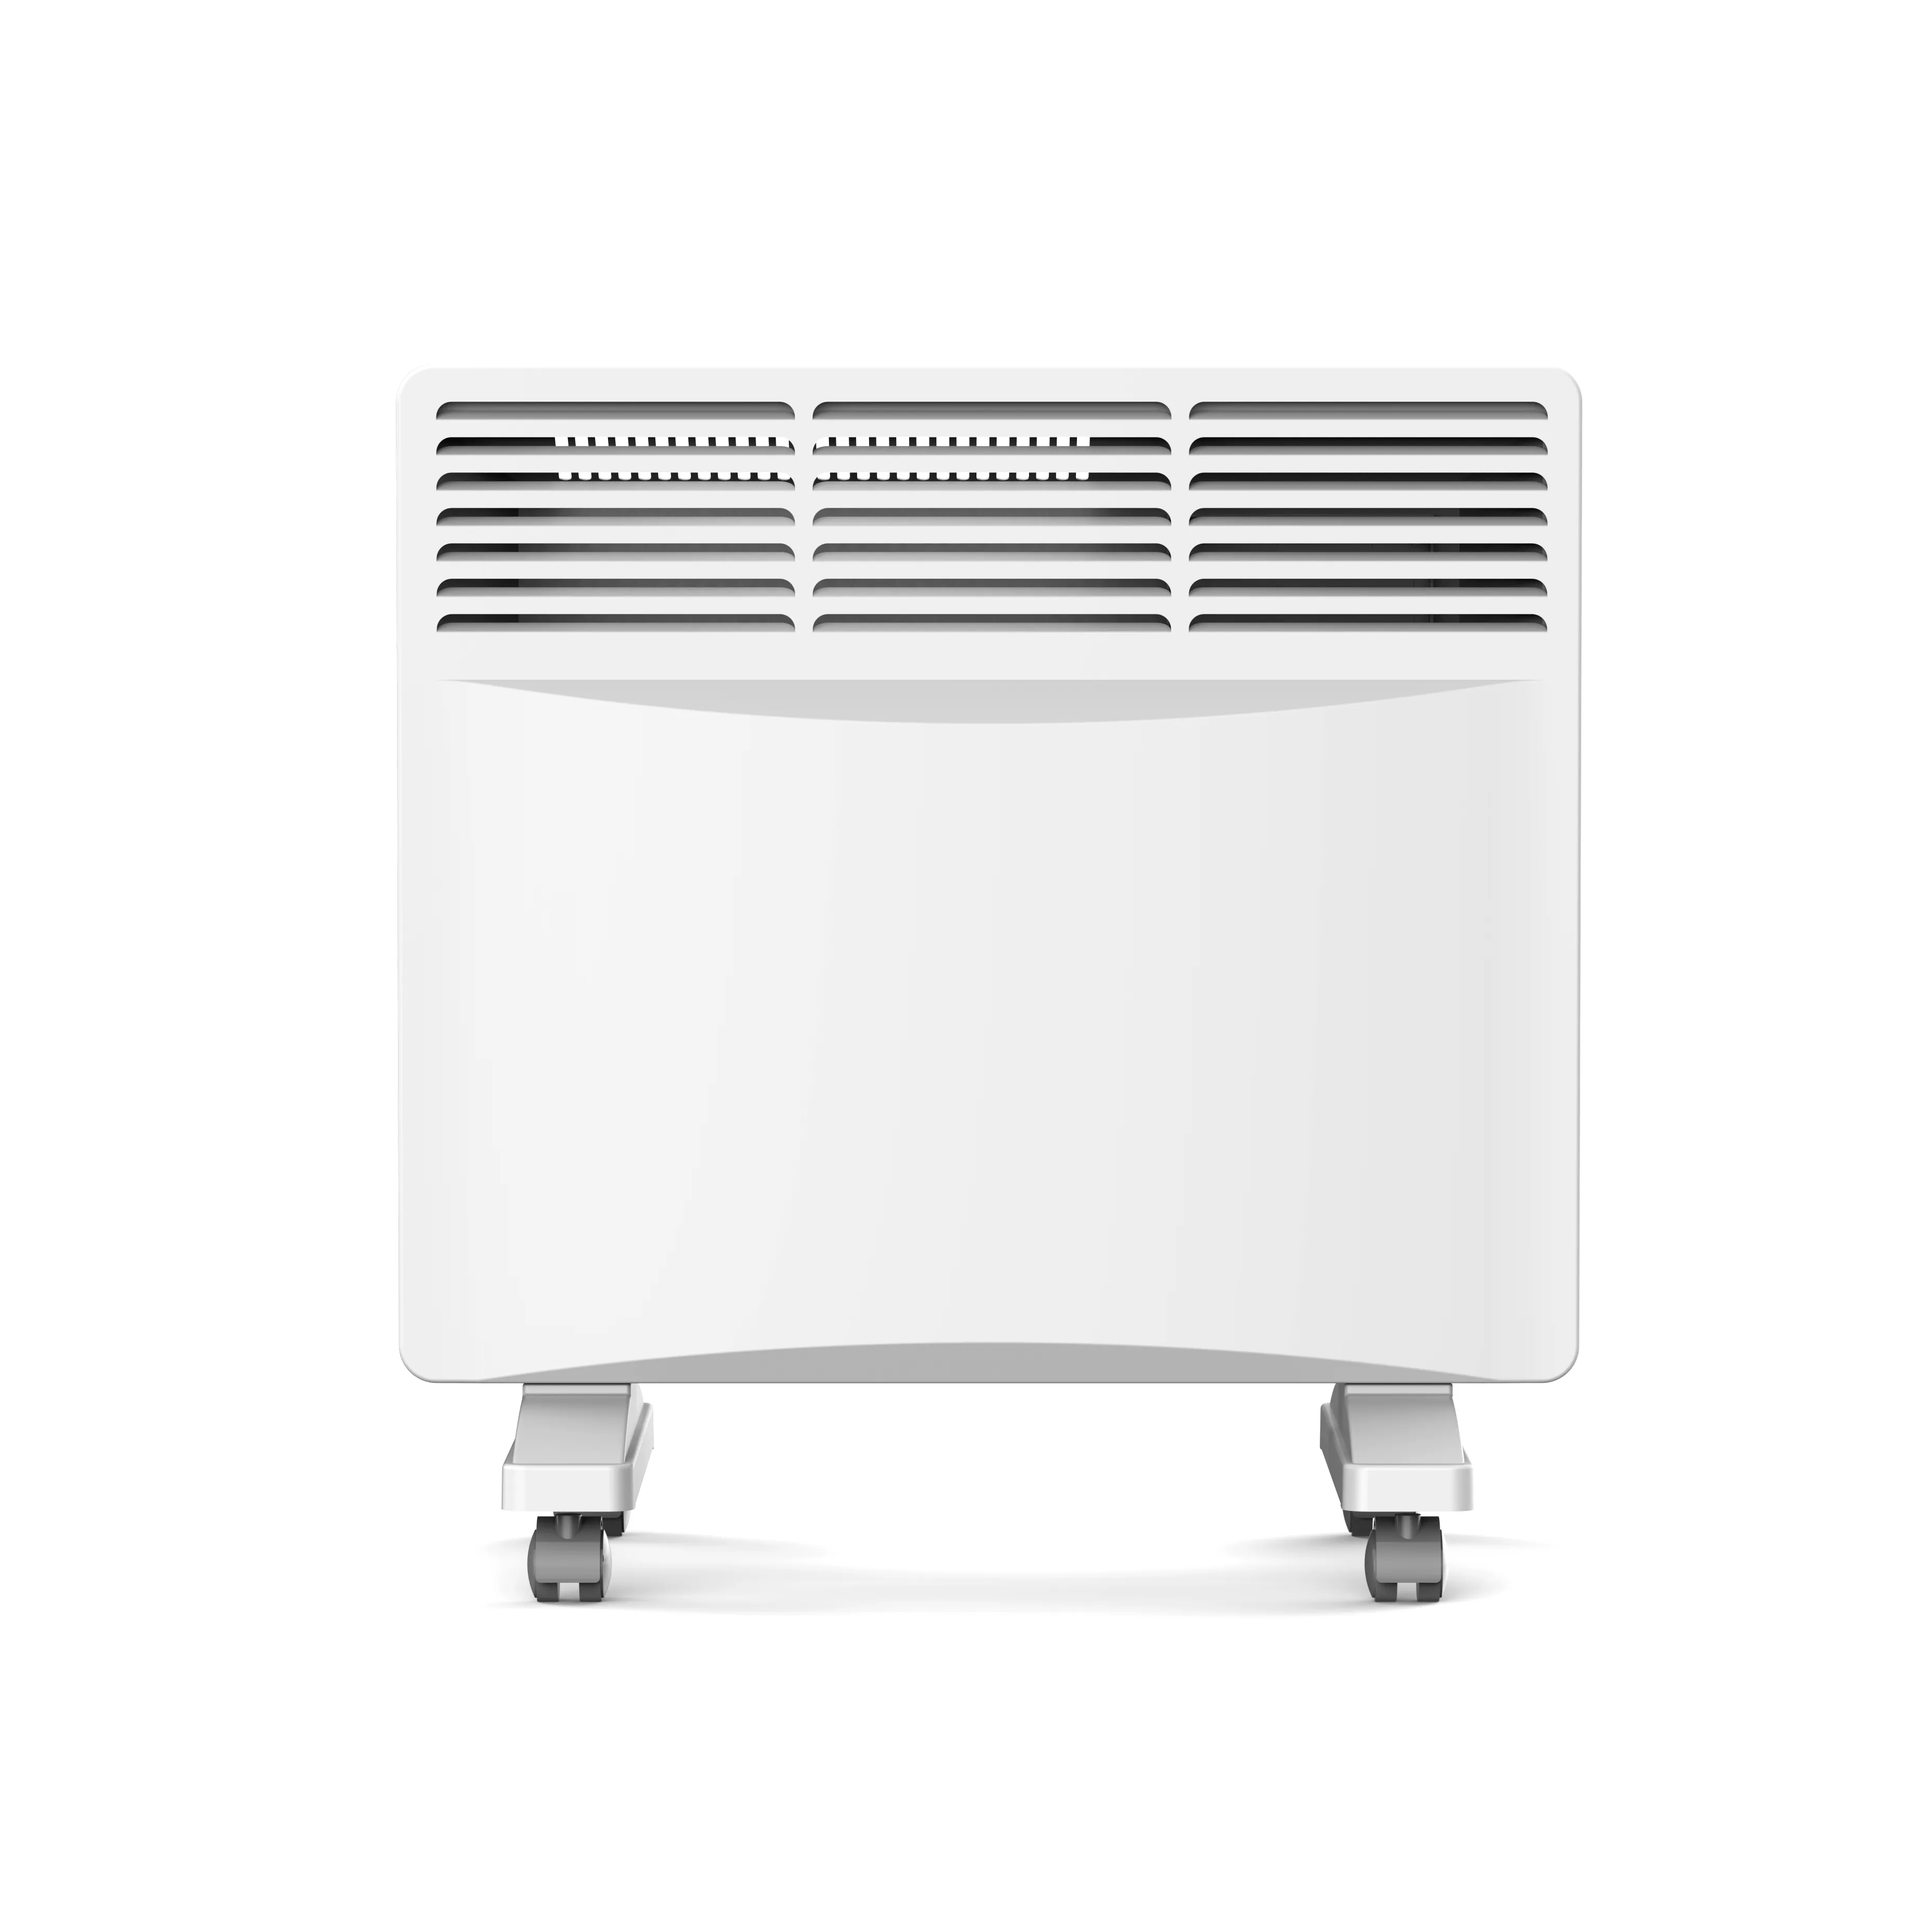 Wall-Mounted and Freestanding Metal Convector Panel Heater 500W to 2500W Waterproof for Bathroom Garden and Bedroom Use